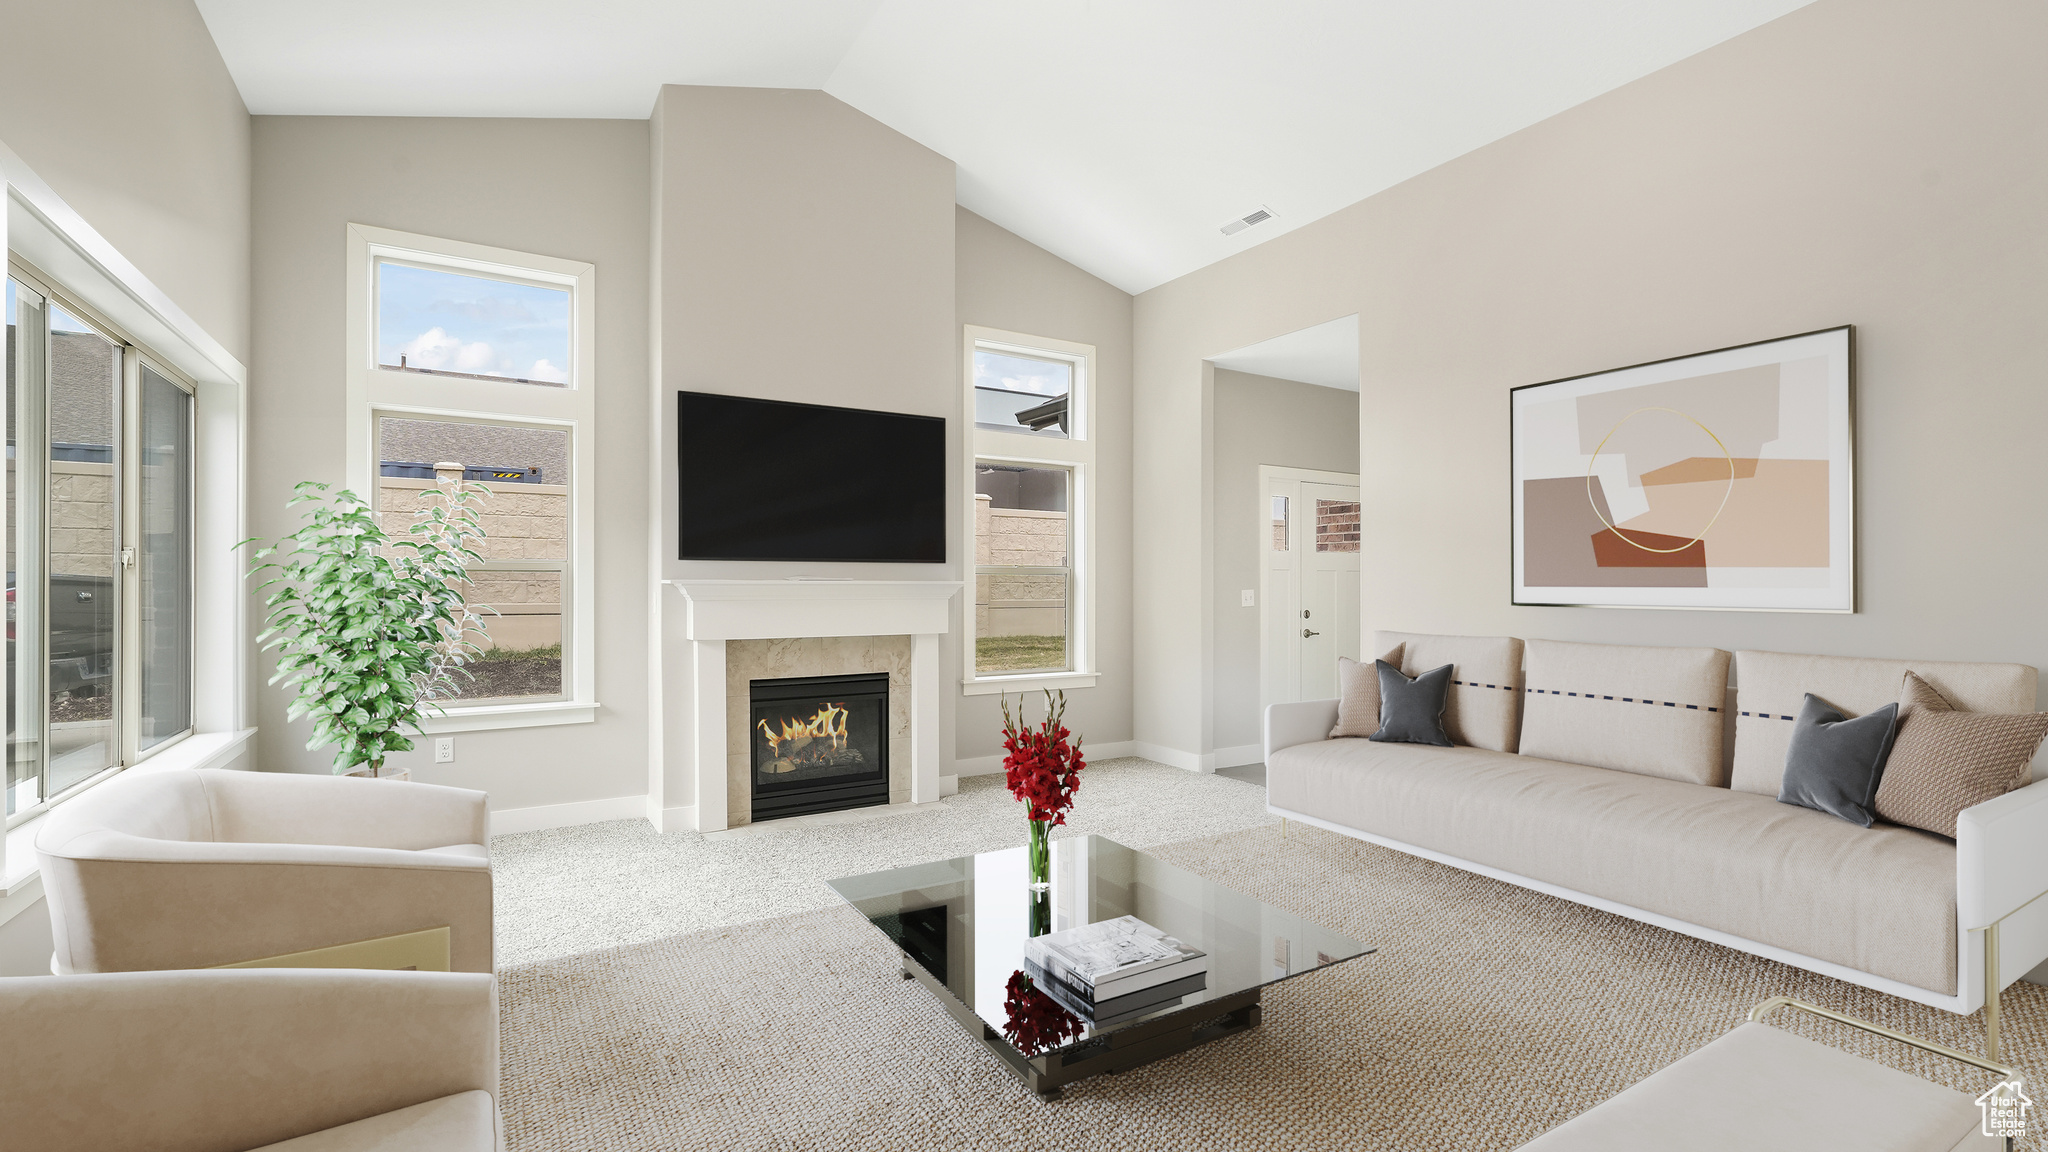 Great room with cozy fireplace and vaulted ceilings.